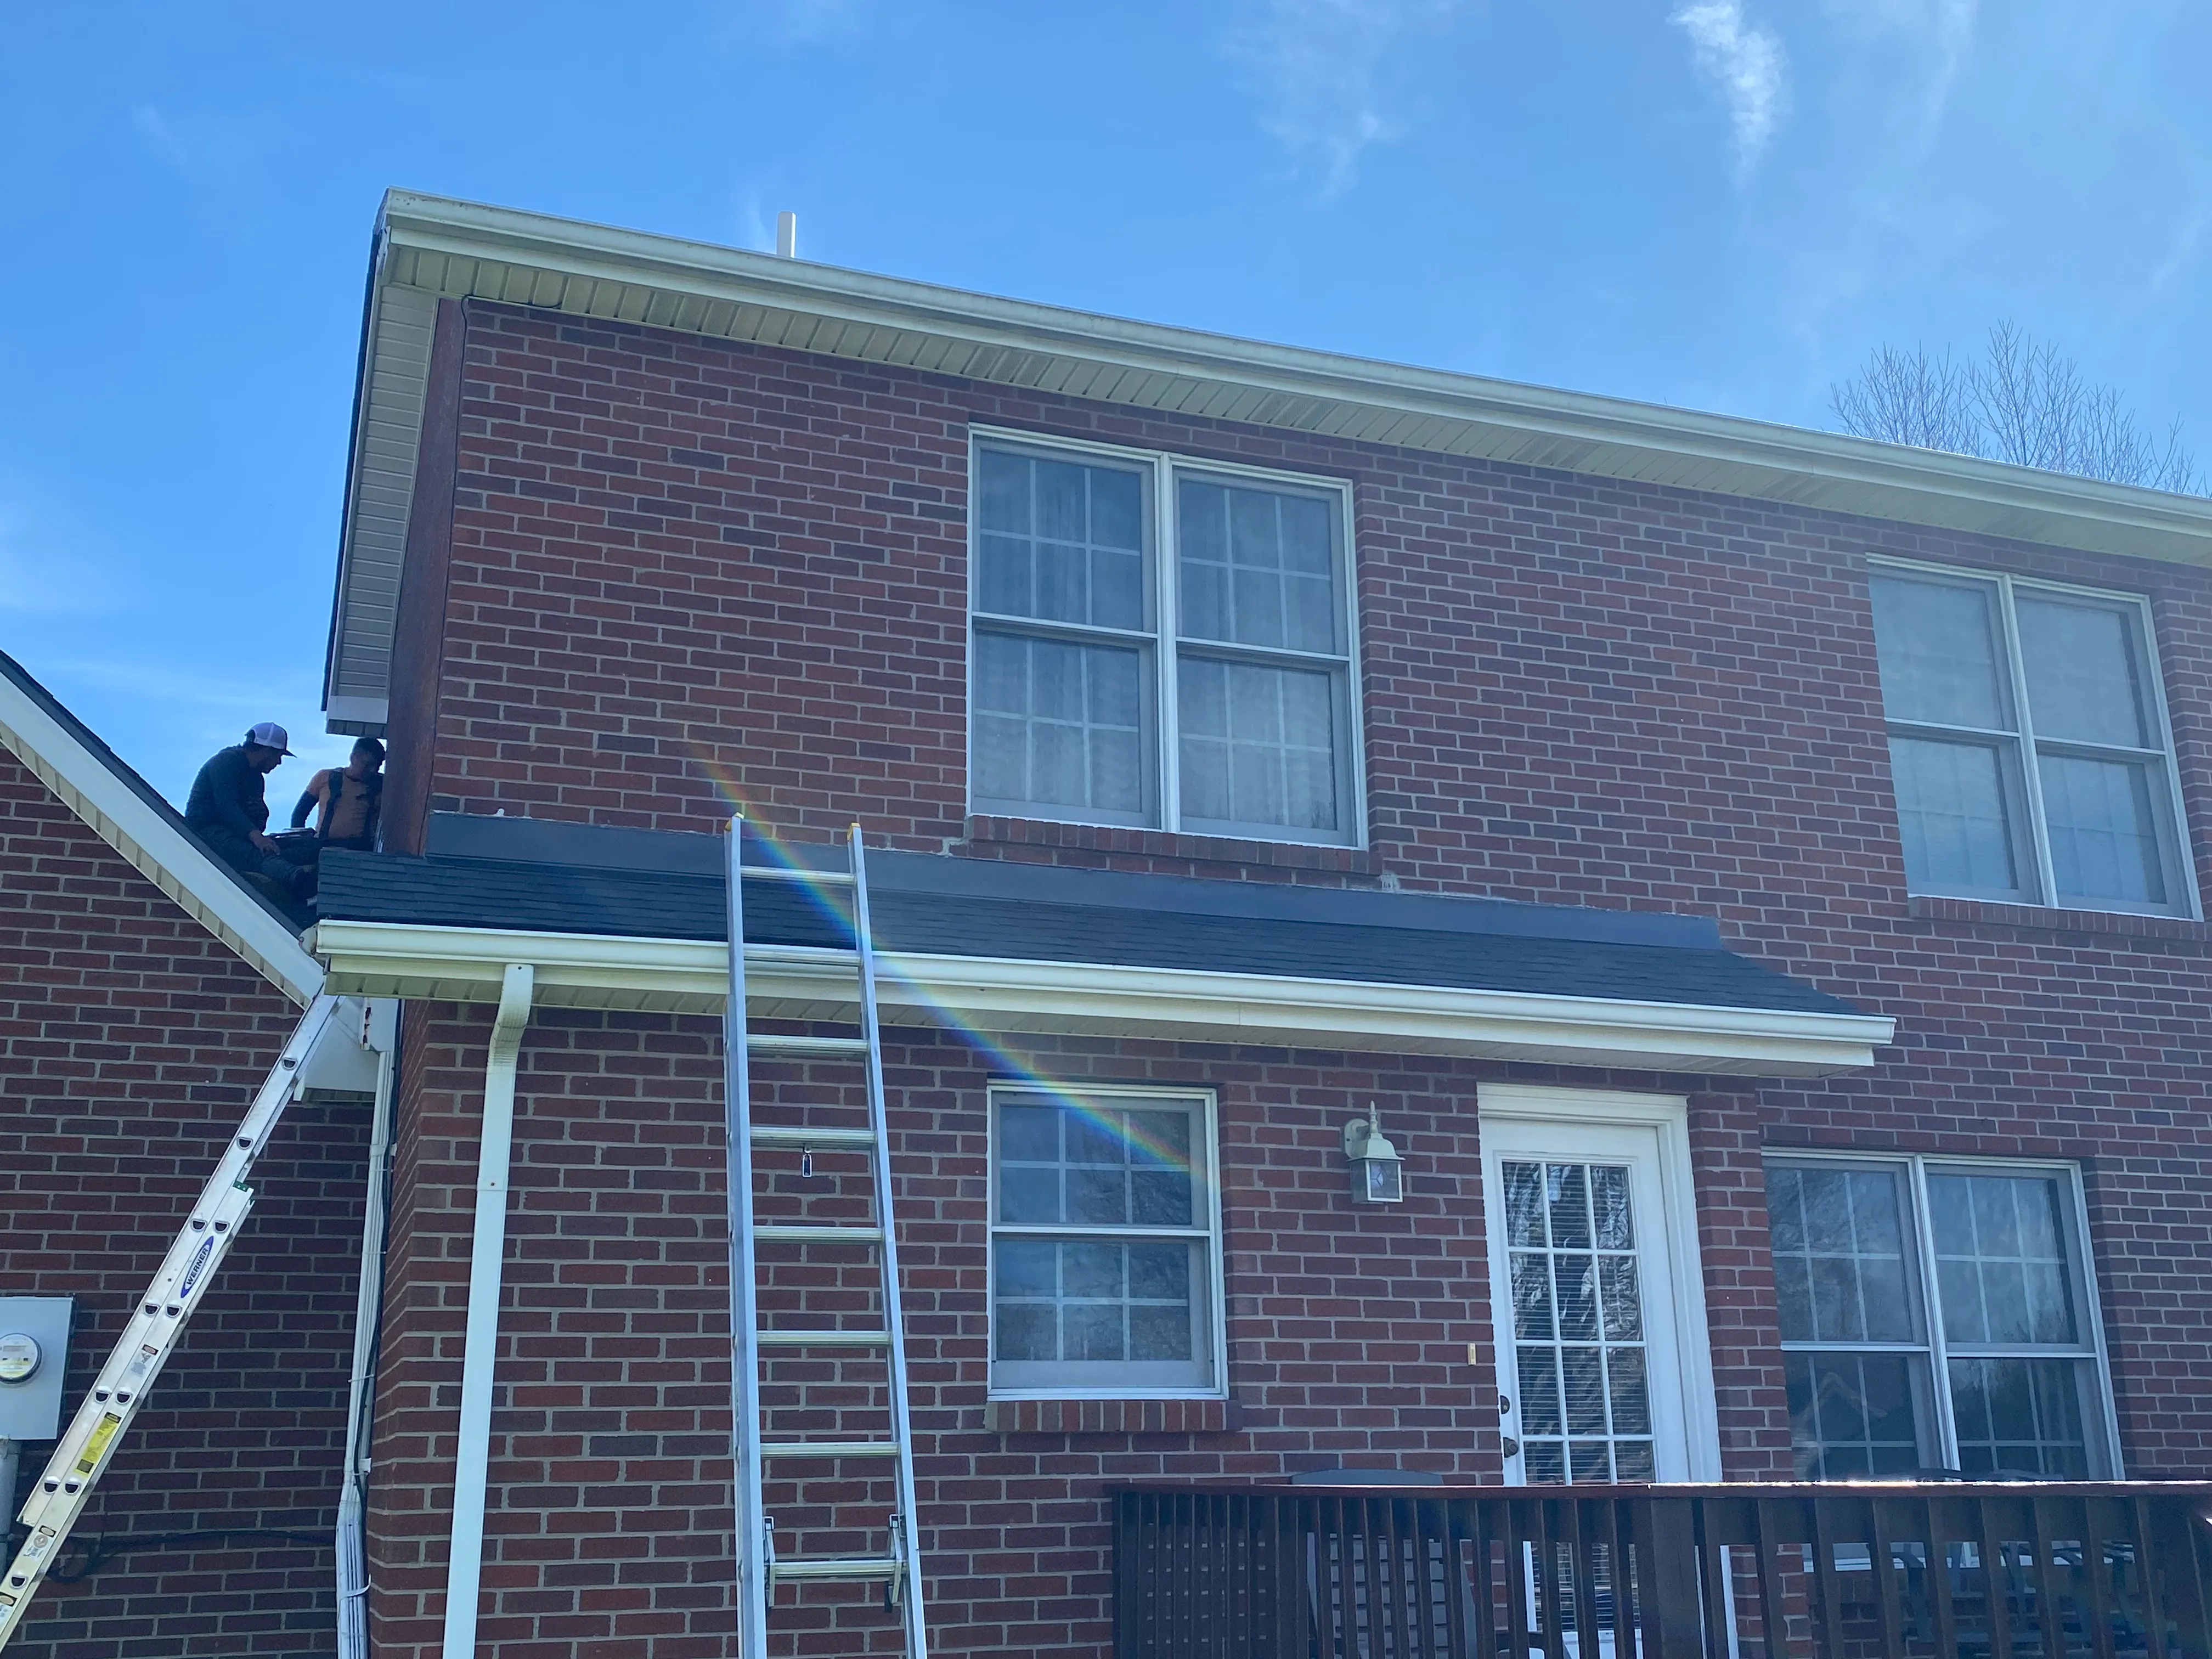 Roofing Installation for Primetime Roofing & Contracting in Winchester, KY